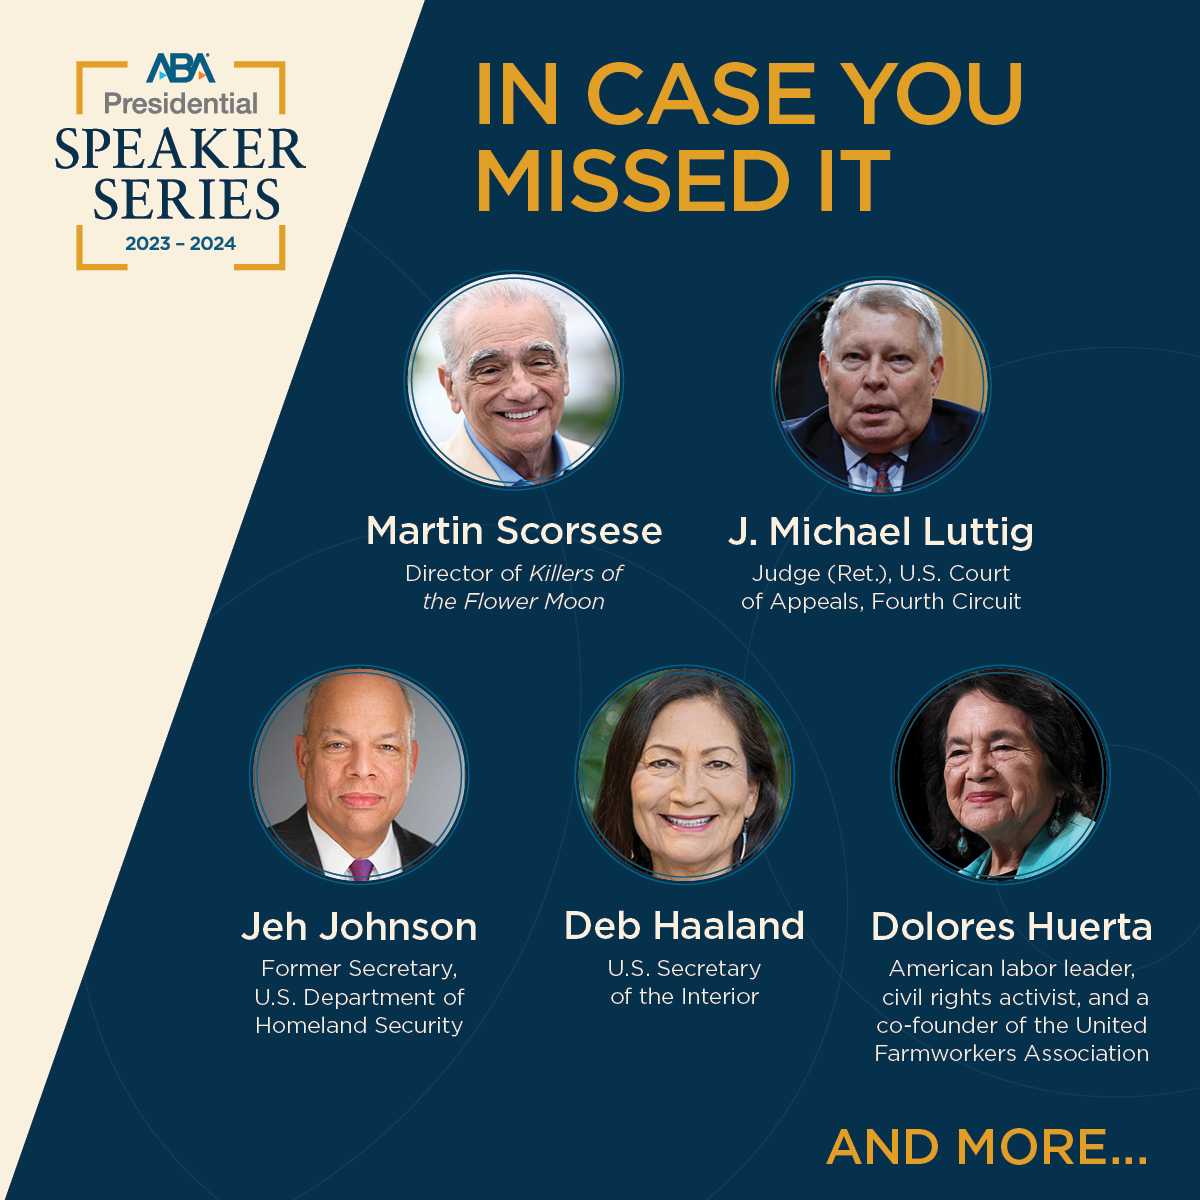 From civil rights heroes to cabinet secretaries to award-winning directors, the ABA Presidential Speaker series has it all. Catch some of the amazing programs that have already run, and see what's coming up next: ambar.org/d1sg4miq